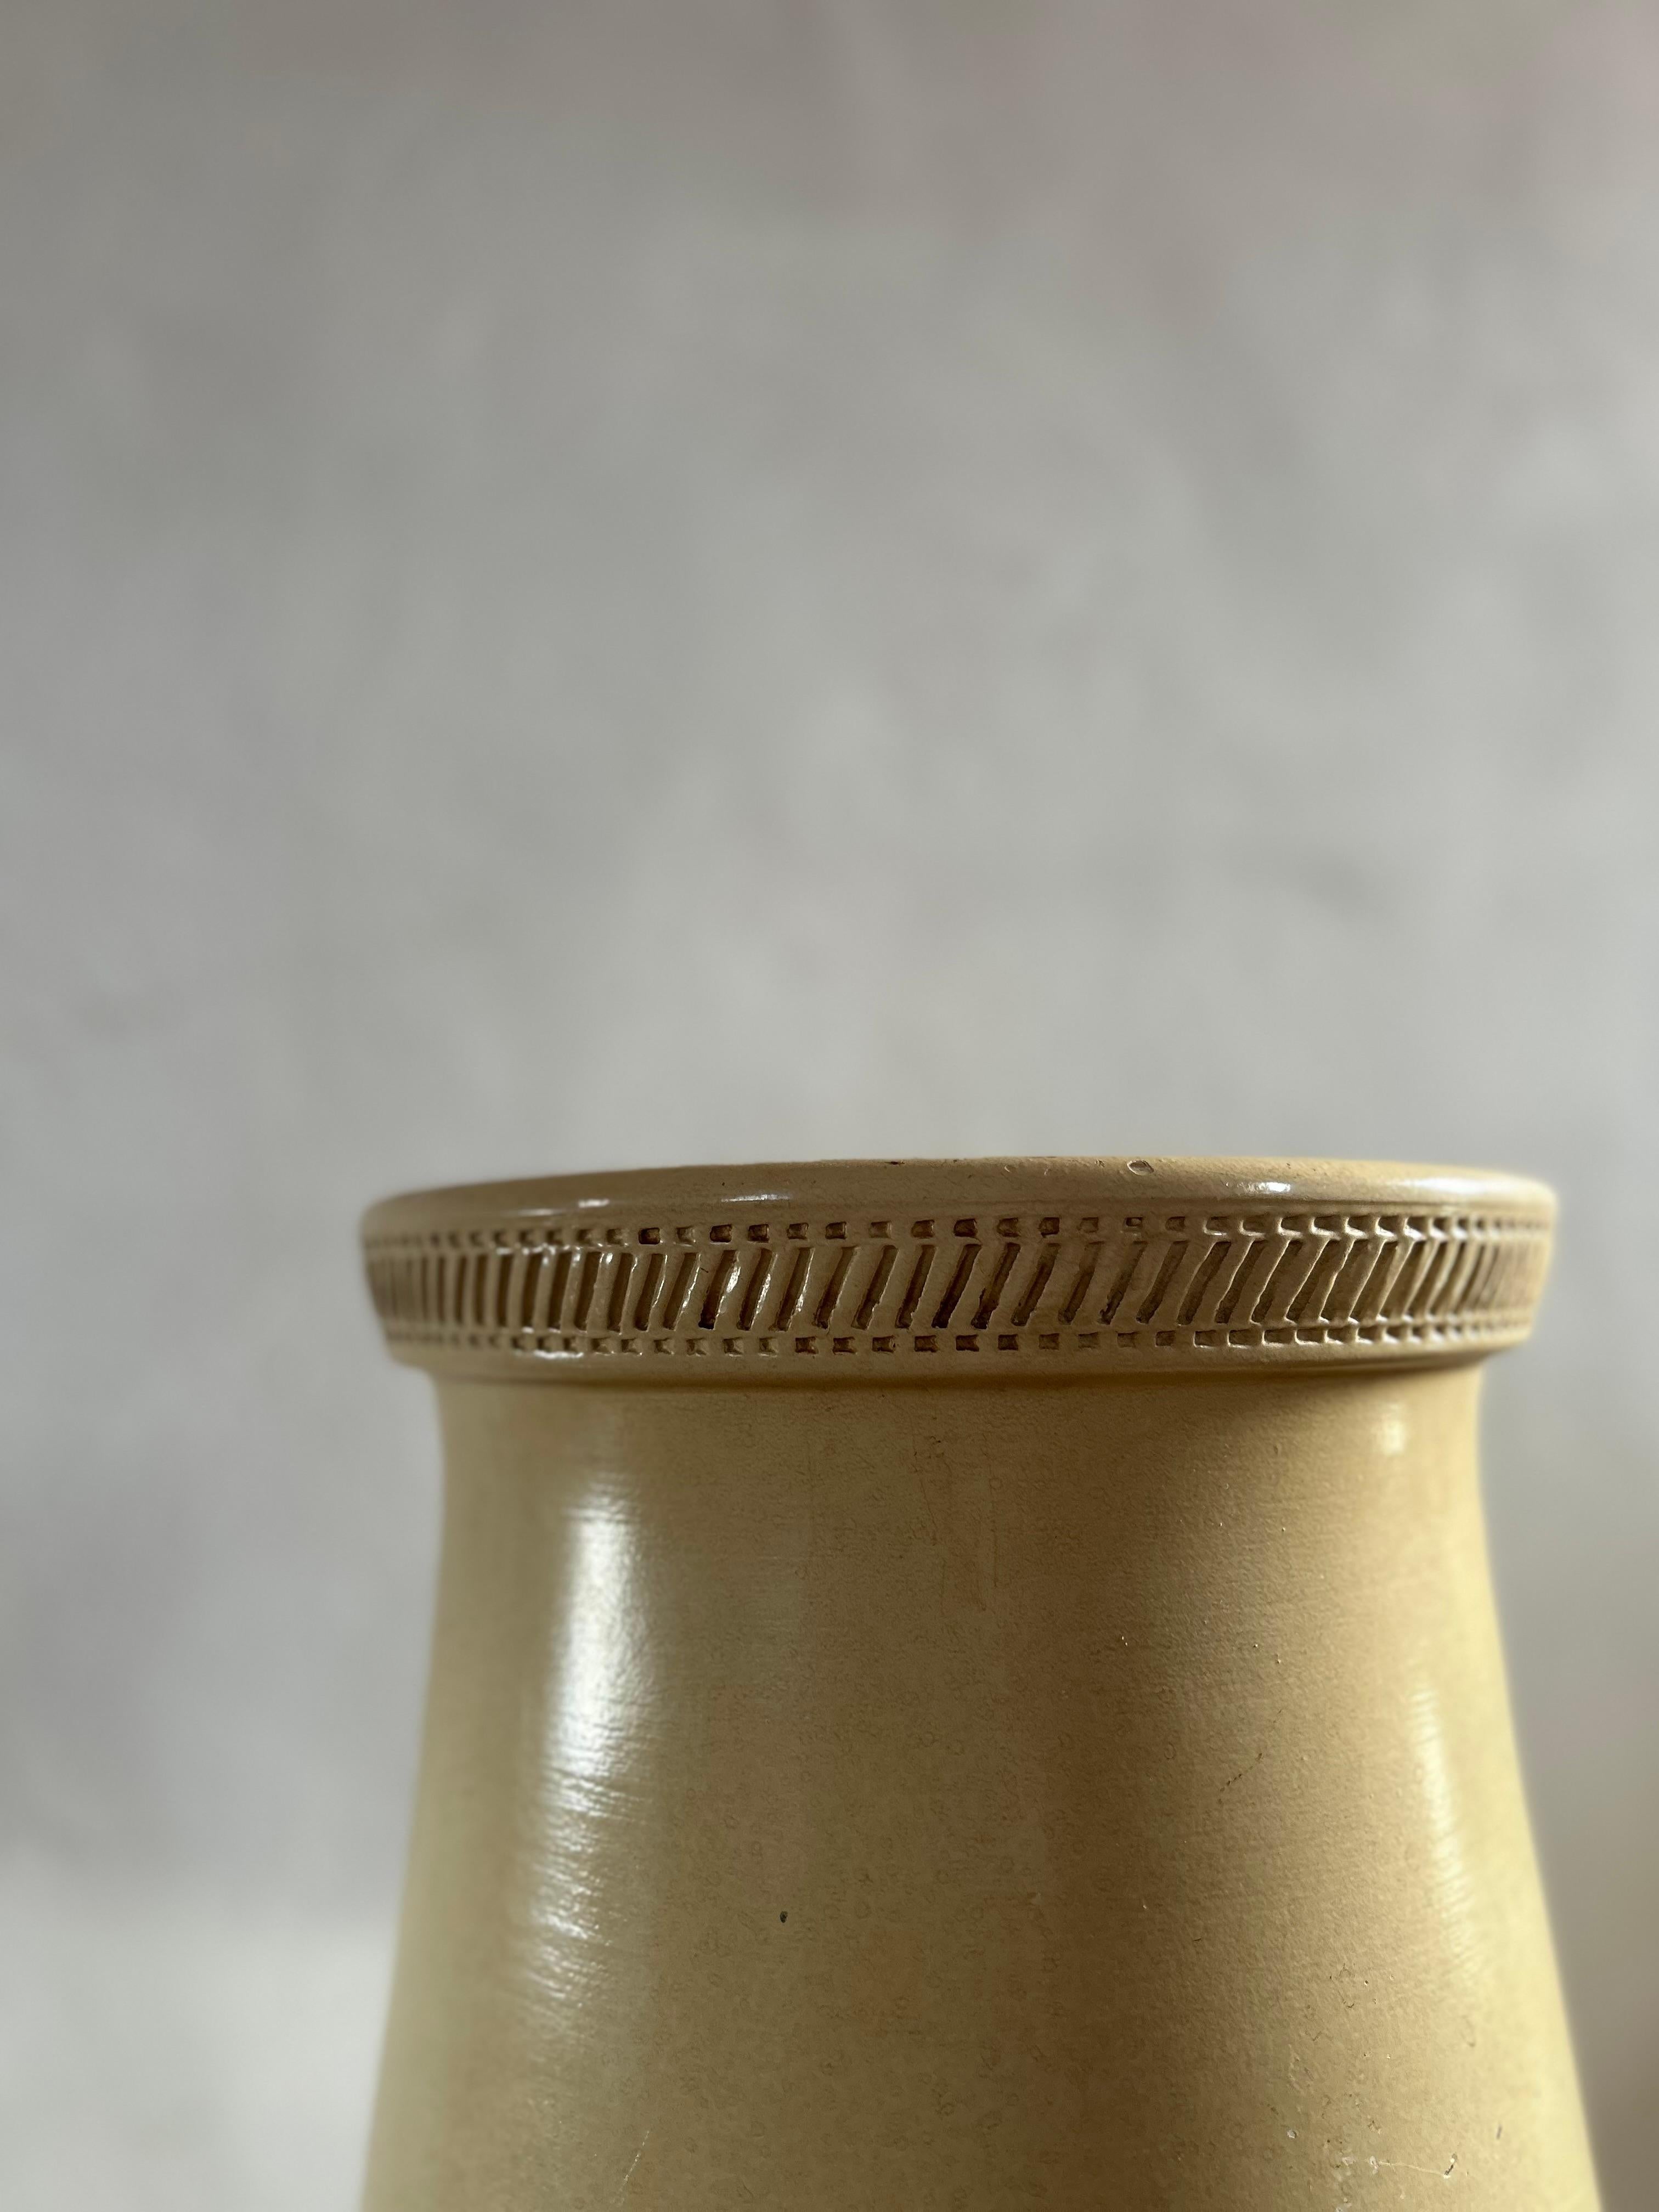 decorative floor vase from Knabstrup, crafted in Denmark during the 1950s. Renowned for their exceptional ceramics and timeless designs, Knabstrup pieces are highly coveted by collectors and design enthusiasts worldwide.

Standing tall and elegant,